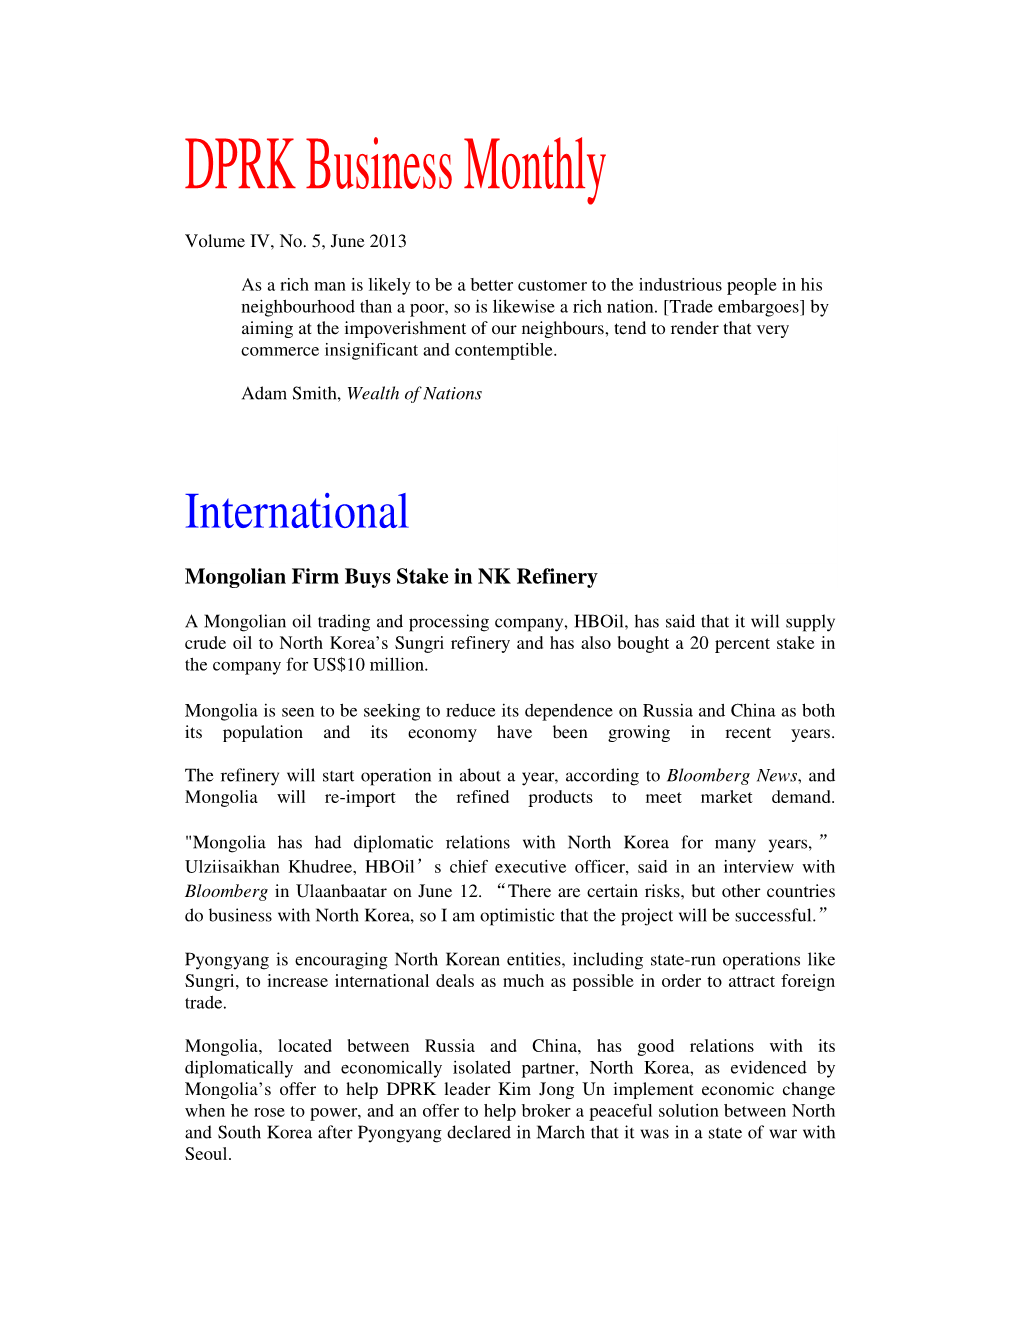 DPRK Business Monthly Volume IV, No.5 Part 1